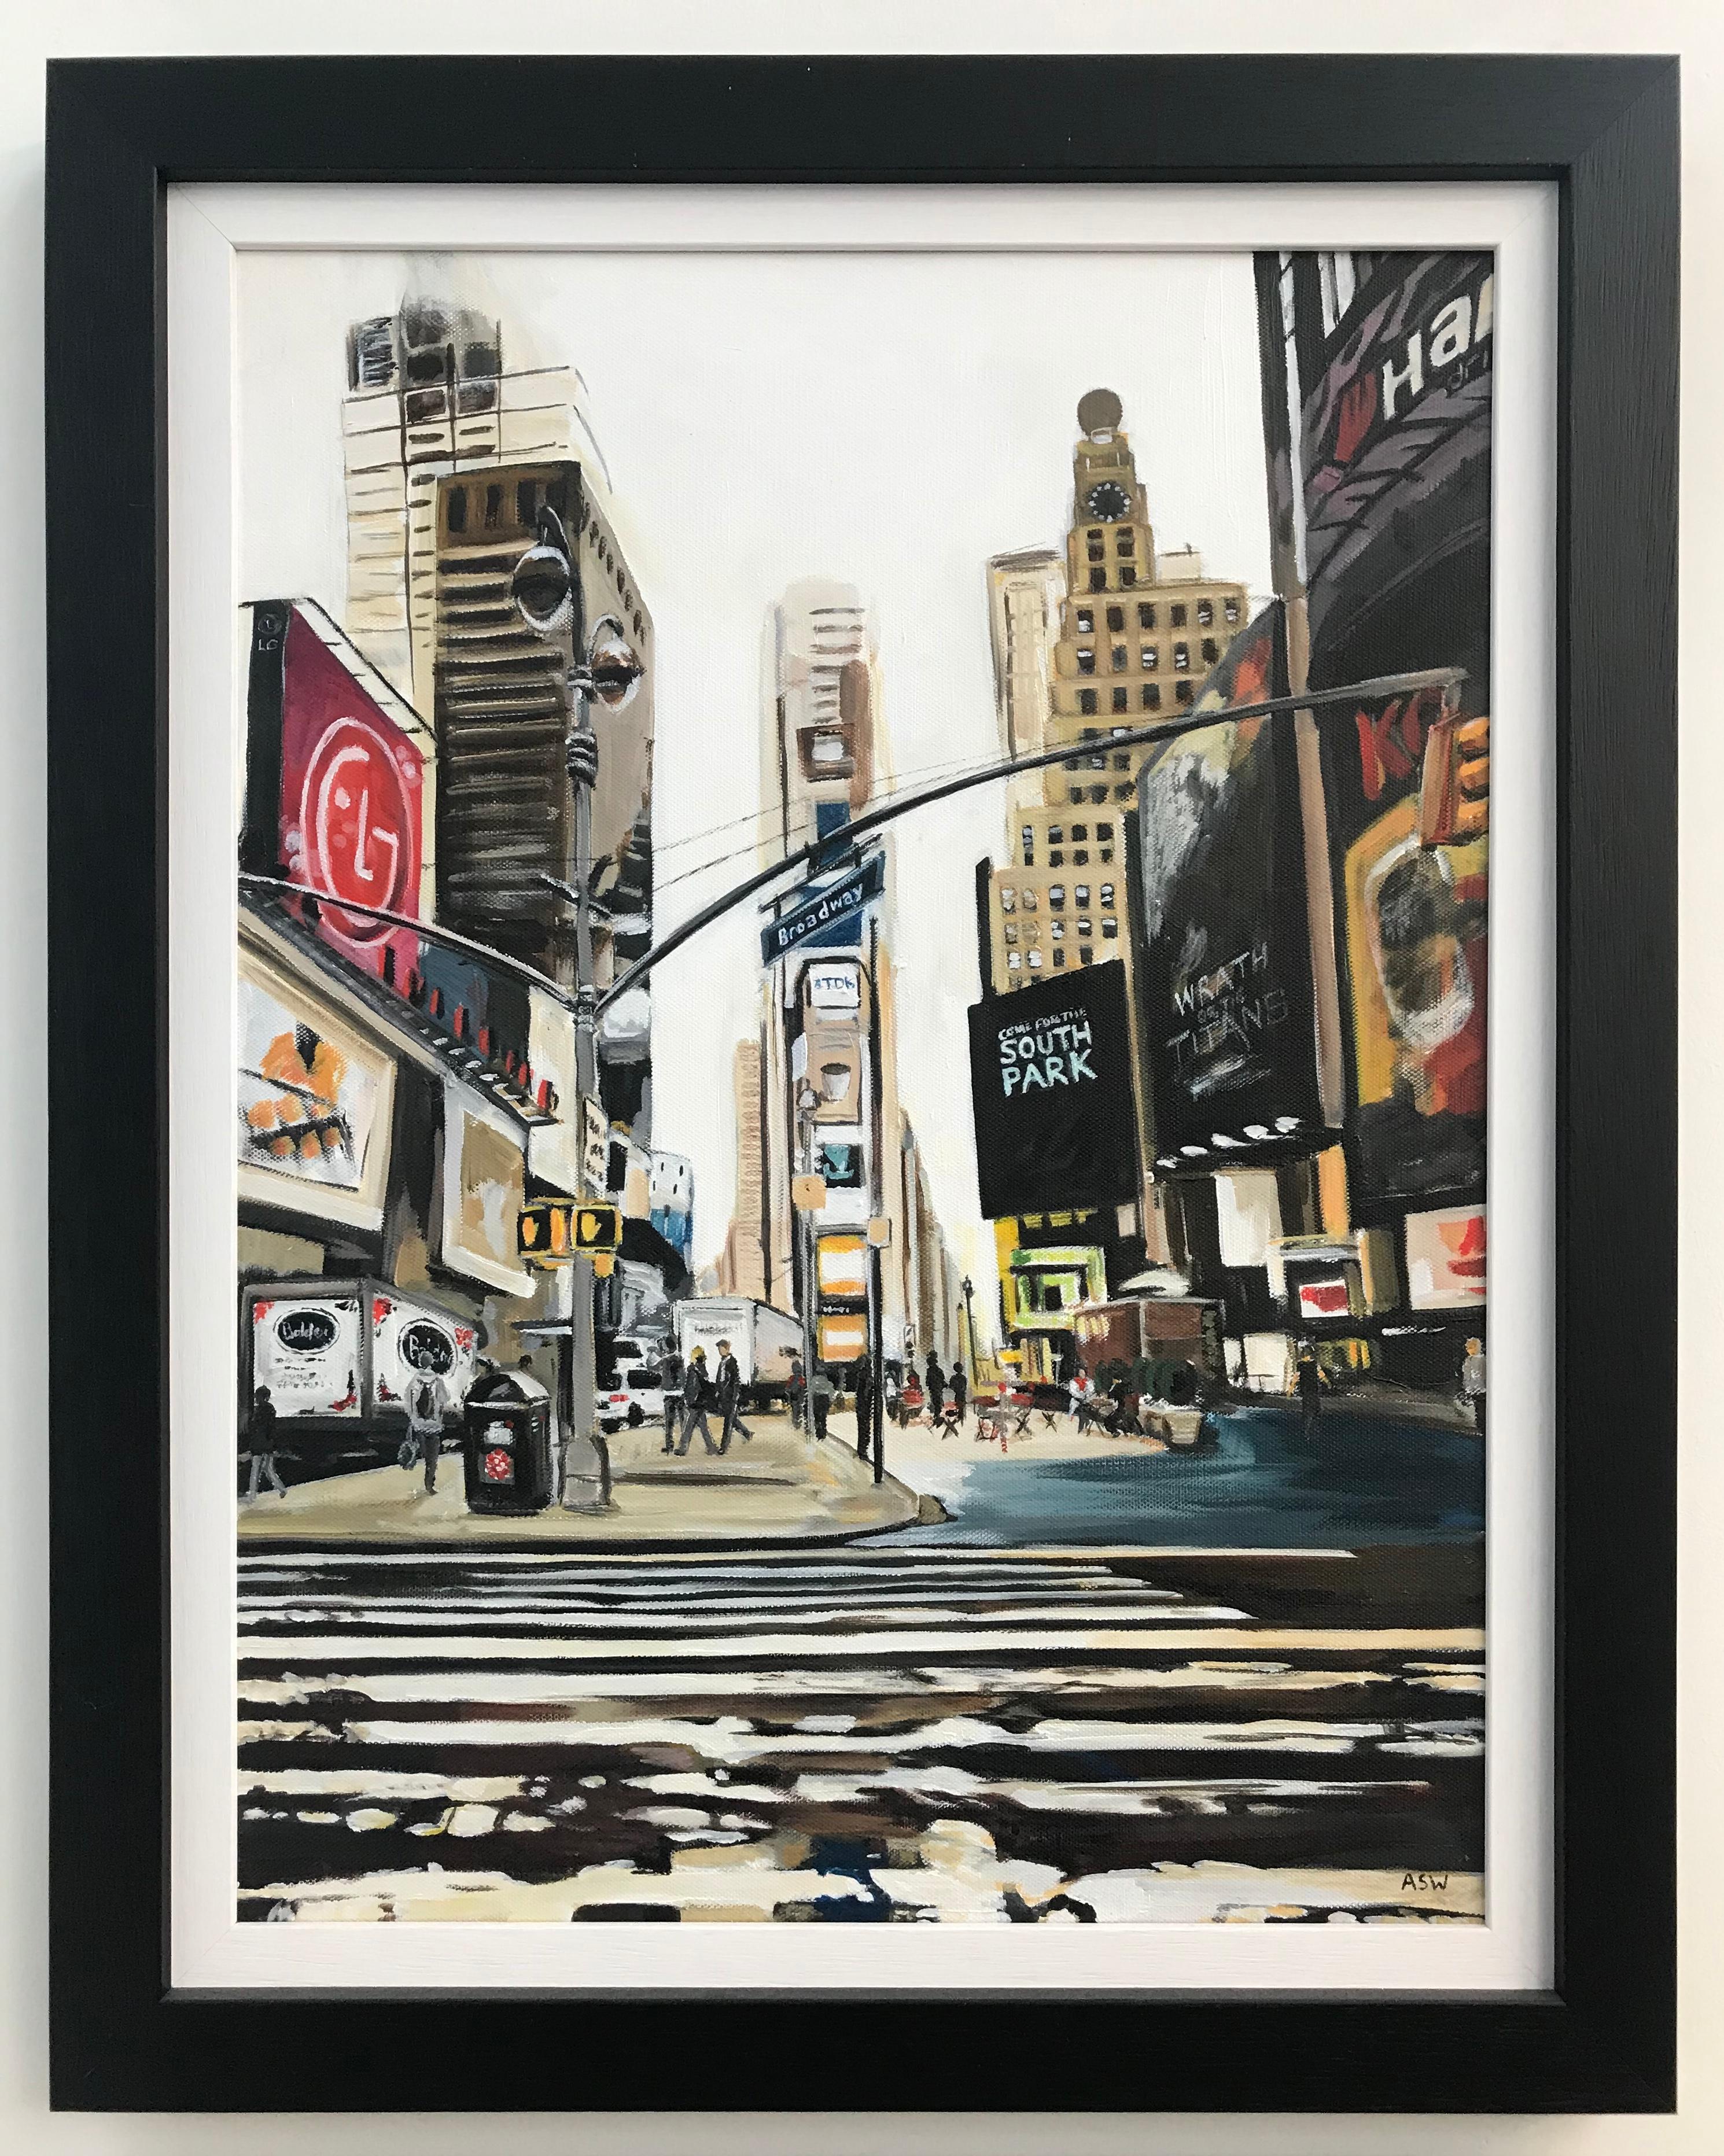 Times Square Broadway 7th Ave Midtown Manhattan New York City by British Artist - Painting by Angela Wakefield